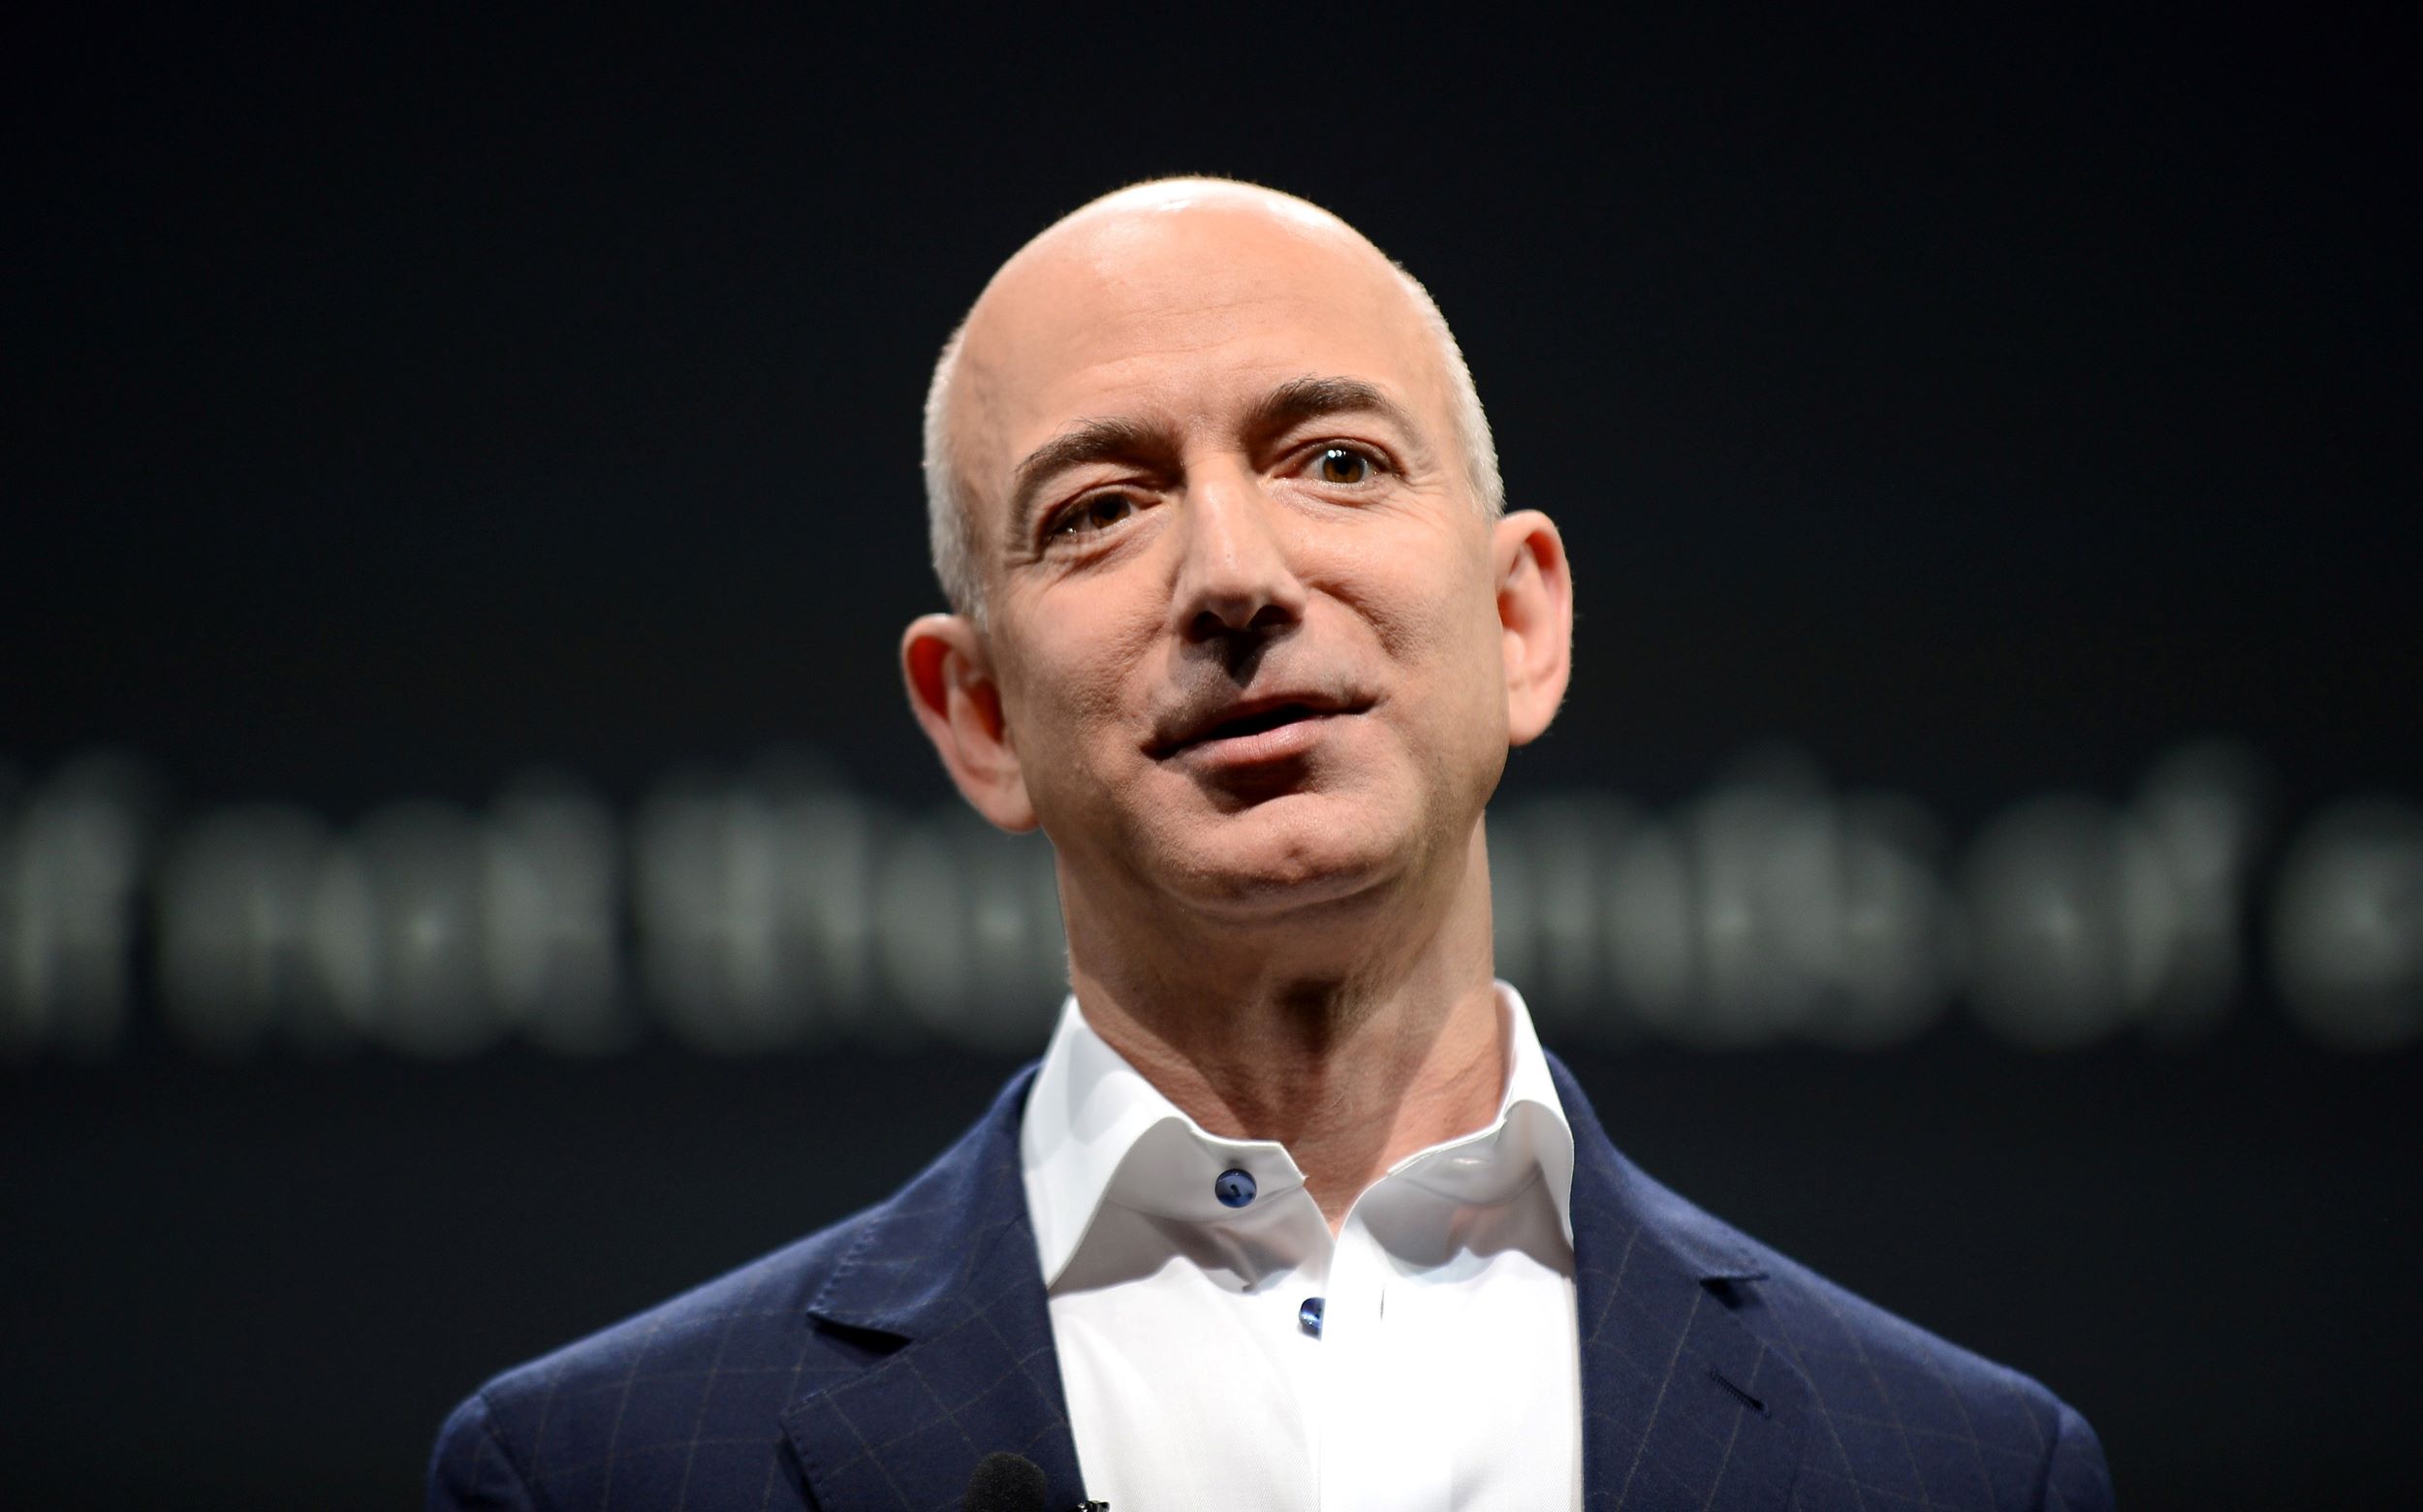 20-captivating-facts-about-jeff-bezos-through-the-years